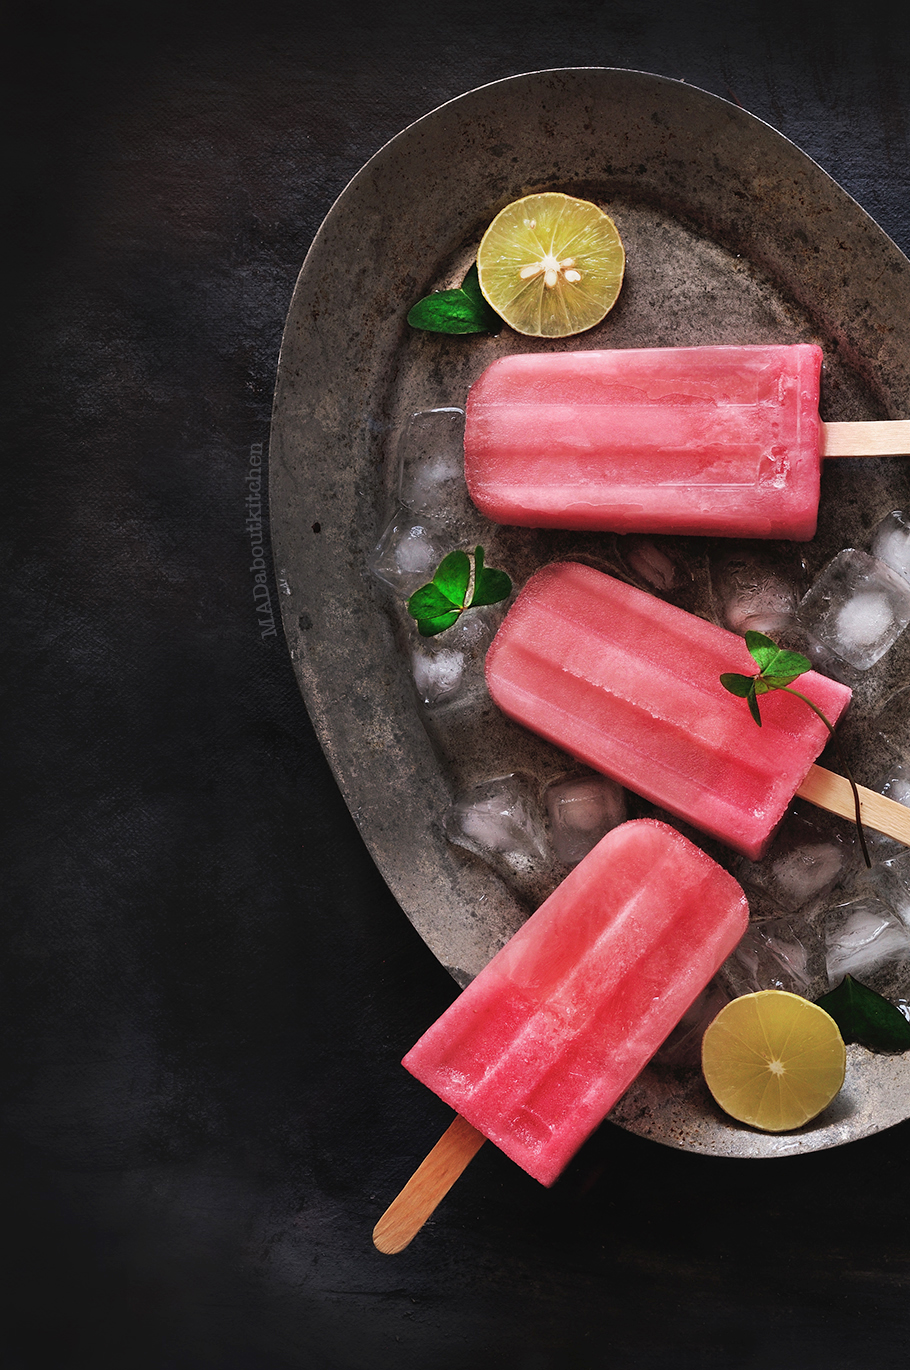 Strawberry Popsicles are simple, pretty looking and is bursting with flavours. These popsicles are very flavourful and the lemon gives that nice touch of tang.